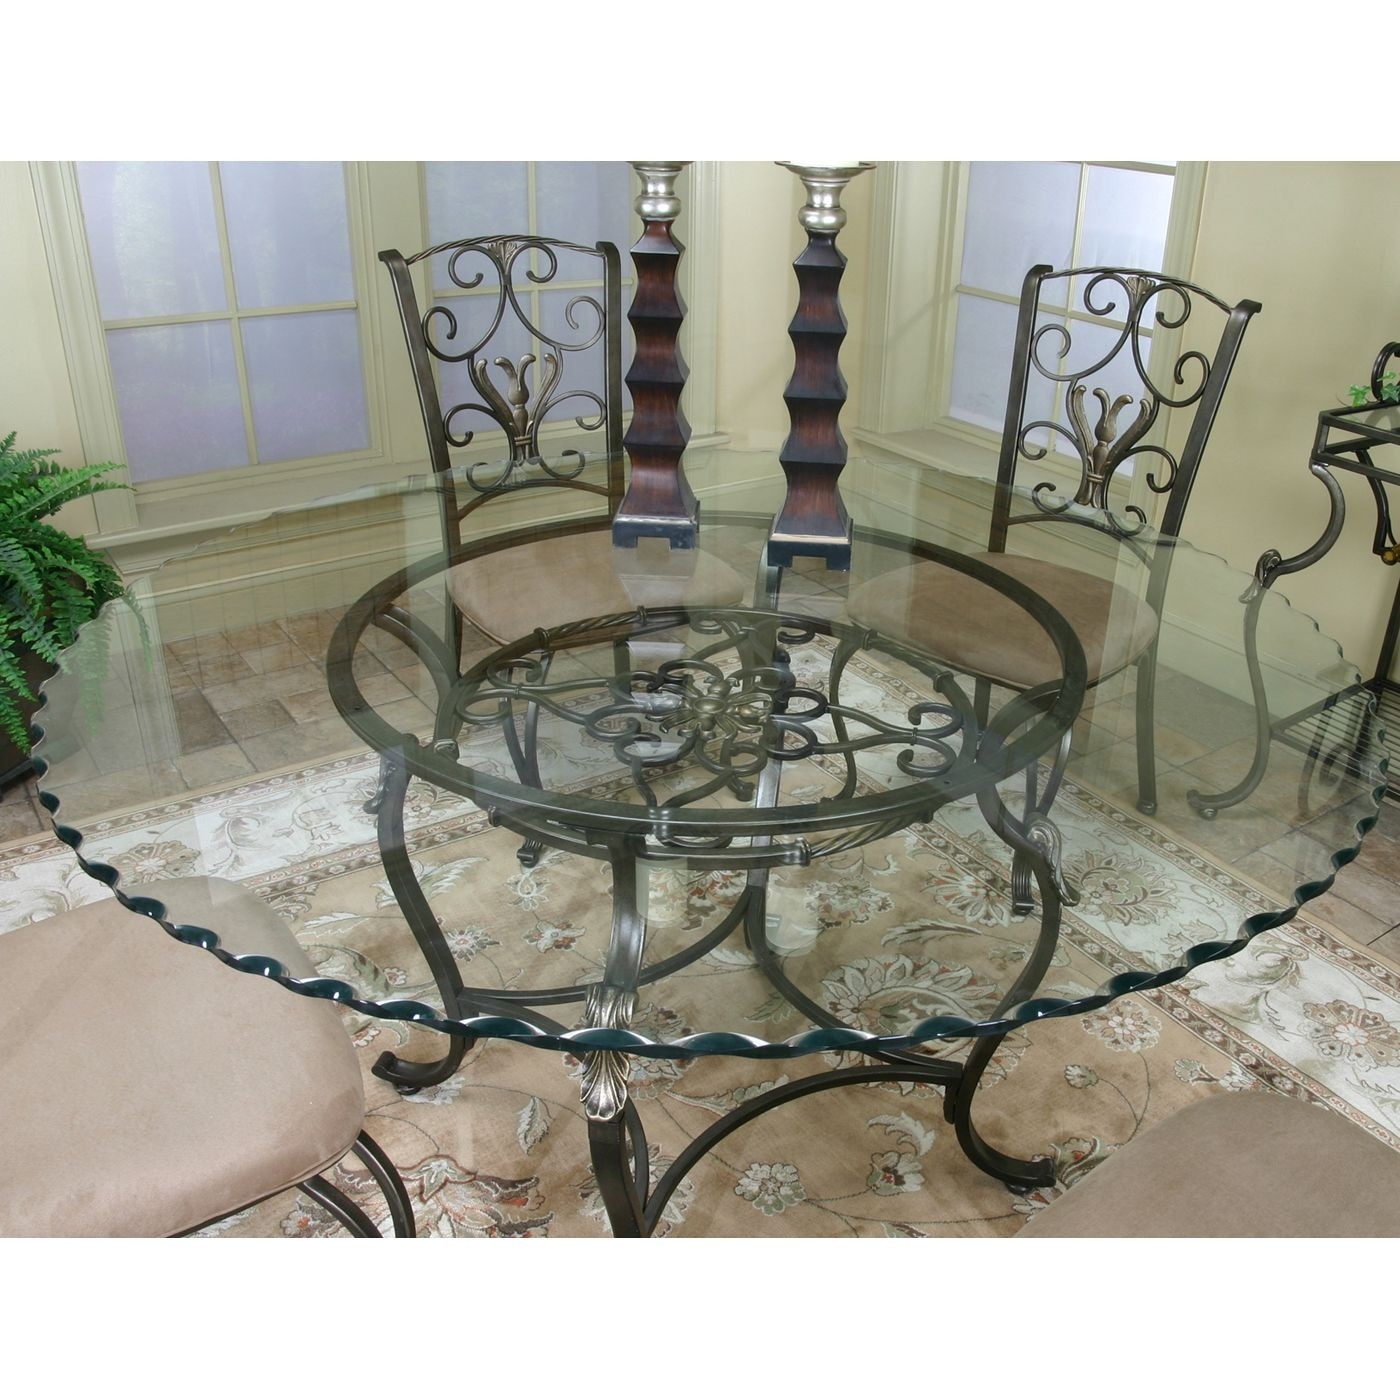 Glass top wrought iron dining table